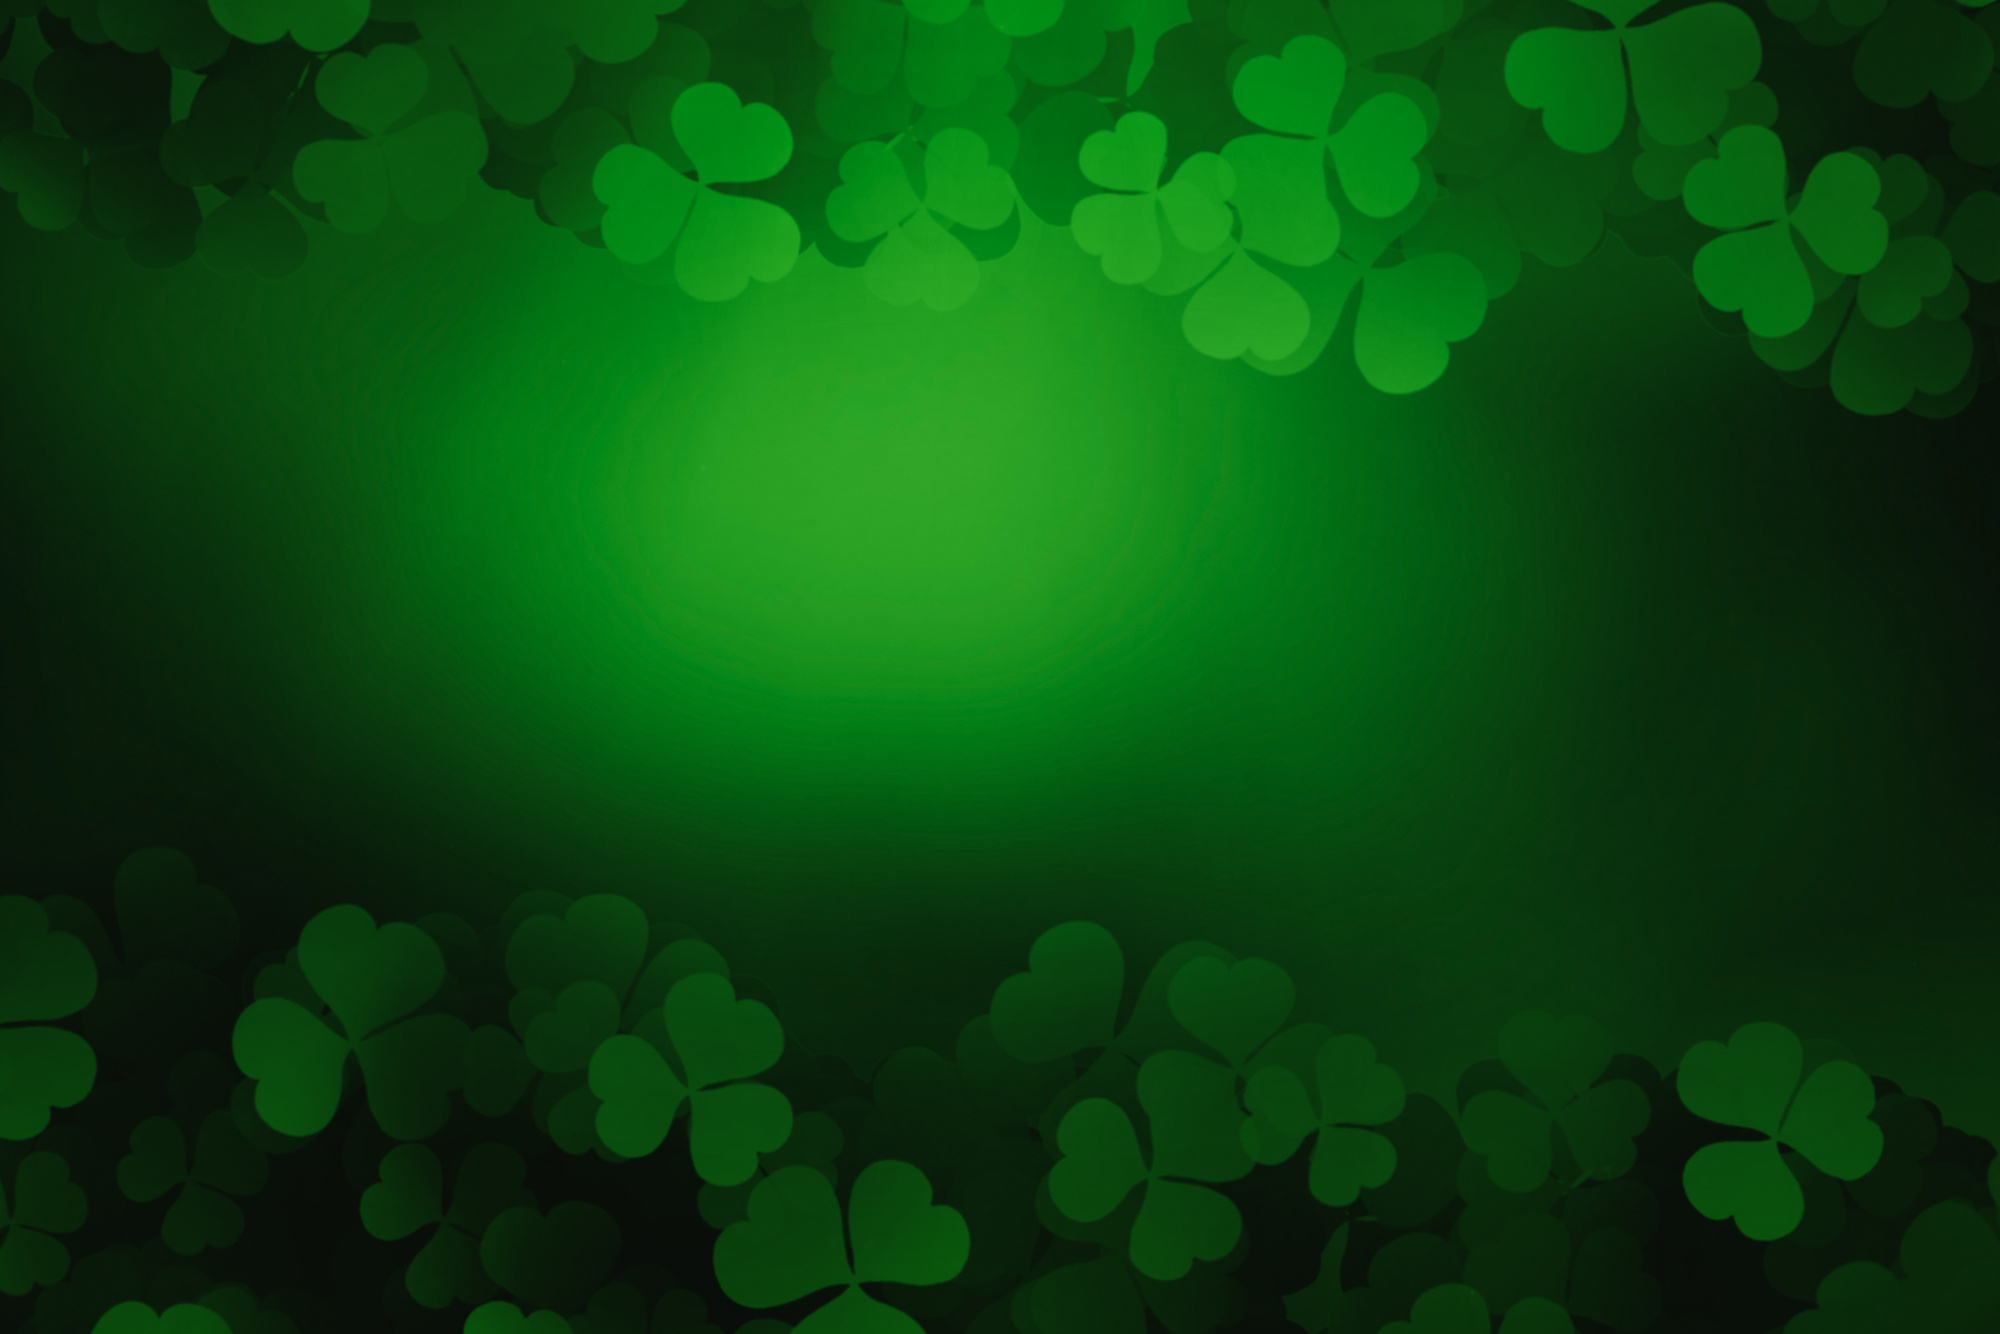 ST Patrick's day green background clover leaf selected fucus for ST Patrick's day celebration design background